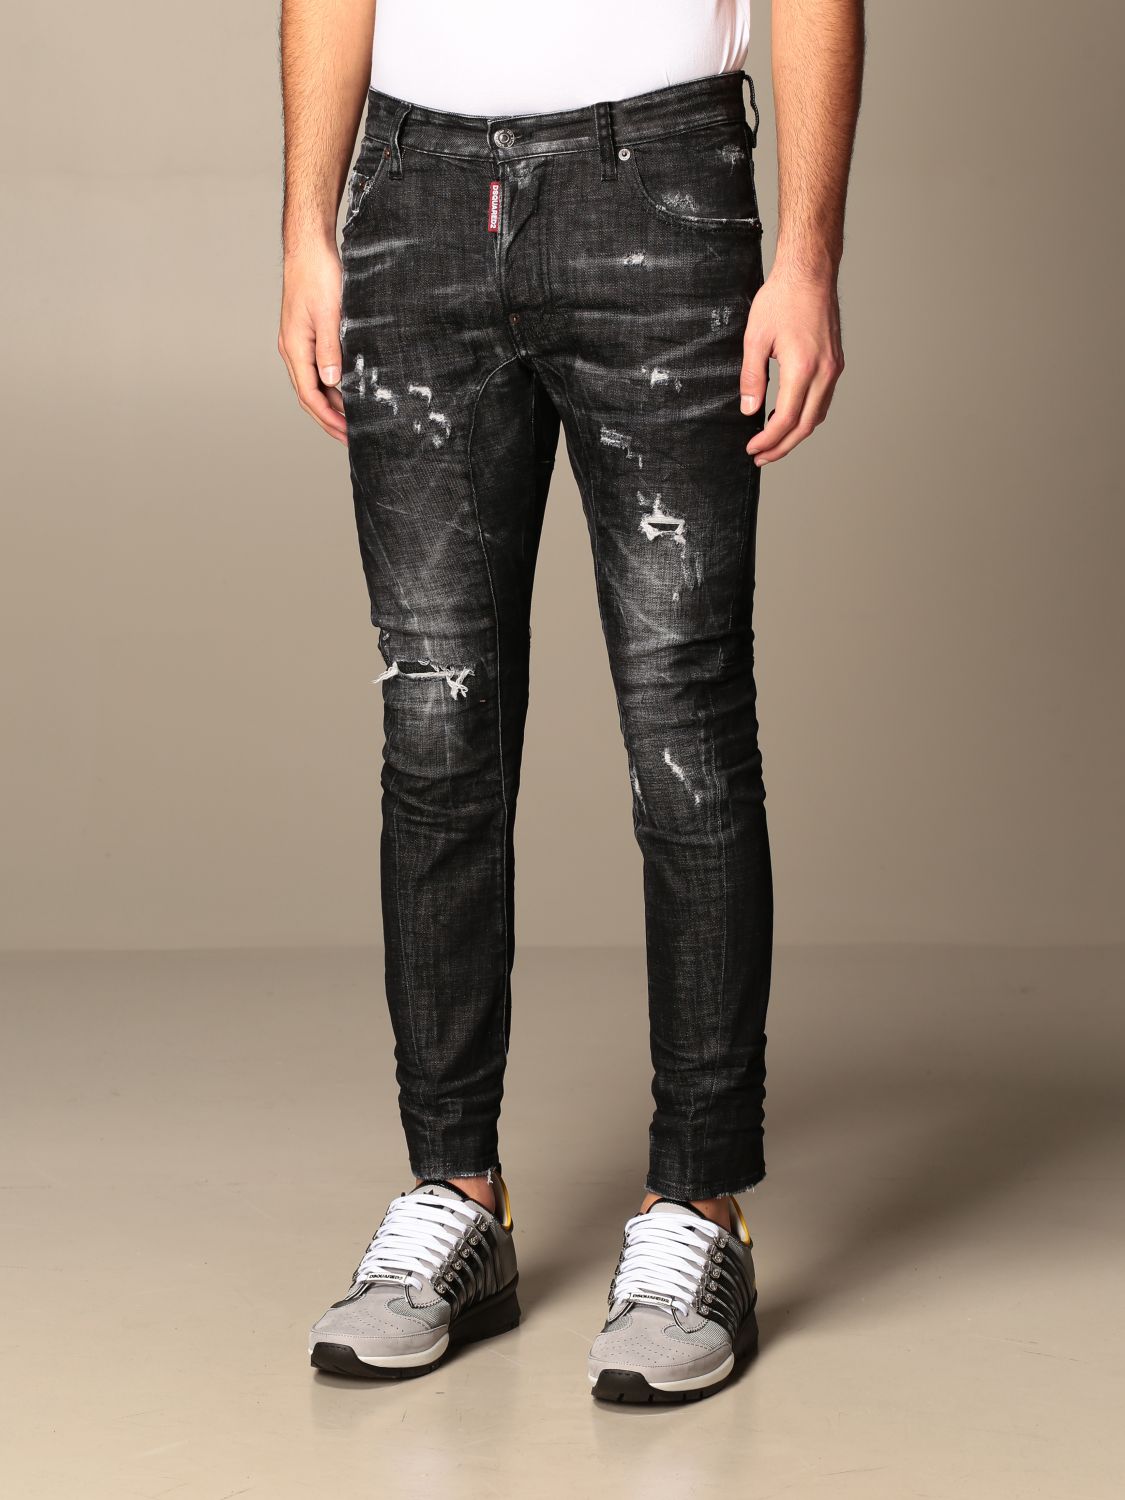 Zuidelijk verrader Inheems DSQUARED2: jeans in used denim with tears - Black | Dsquared2 jeans  S71LB0801 S30357 online on GIGLIO.COM